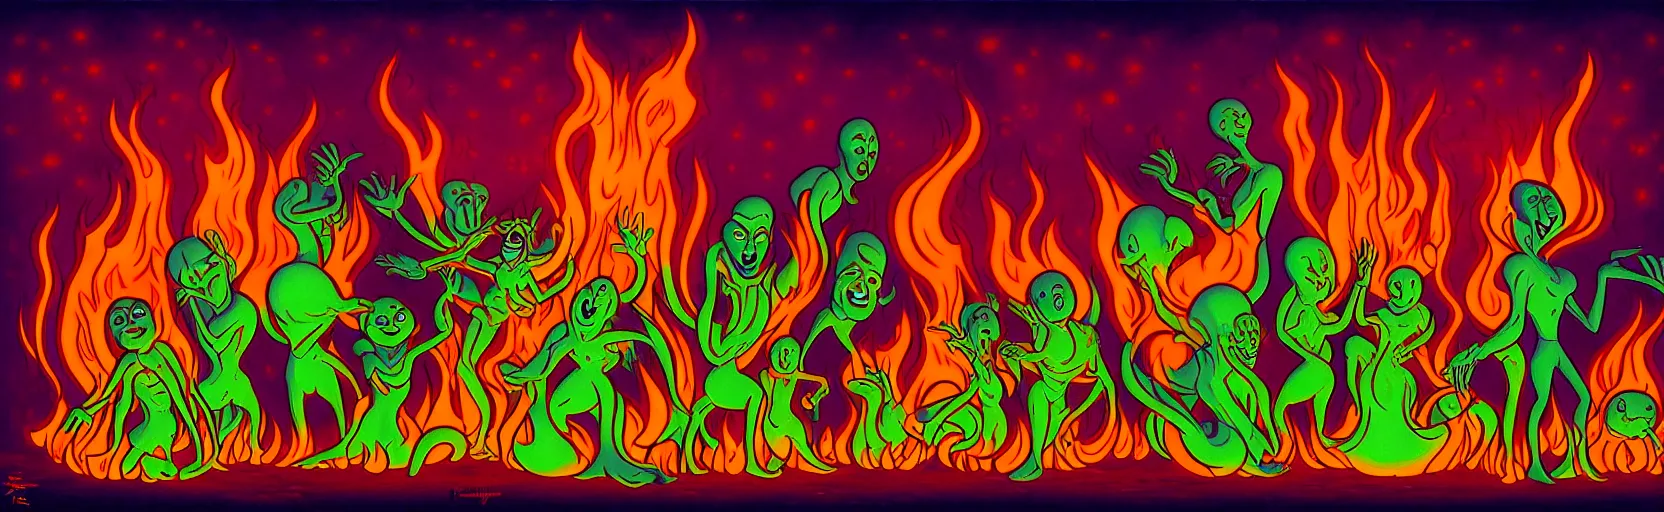 Prompt: uncanny repressed mutants from the depths of a festive imaginal realm in the collective unconscious, dramatic fire glow lighting, surreal dark 1 9 3 0 s fleischer cartoon characters, surreal painting by ronny khalil